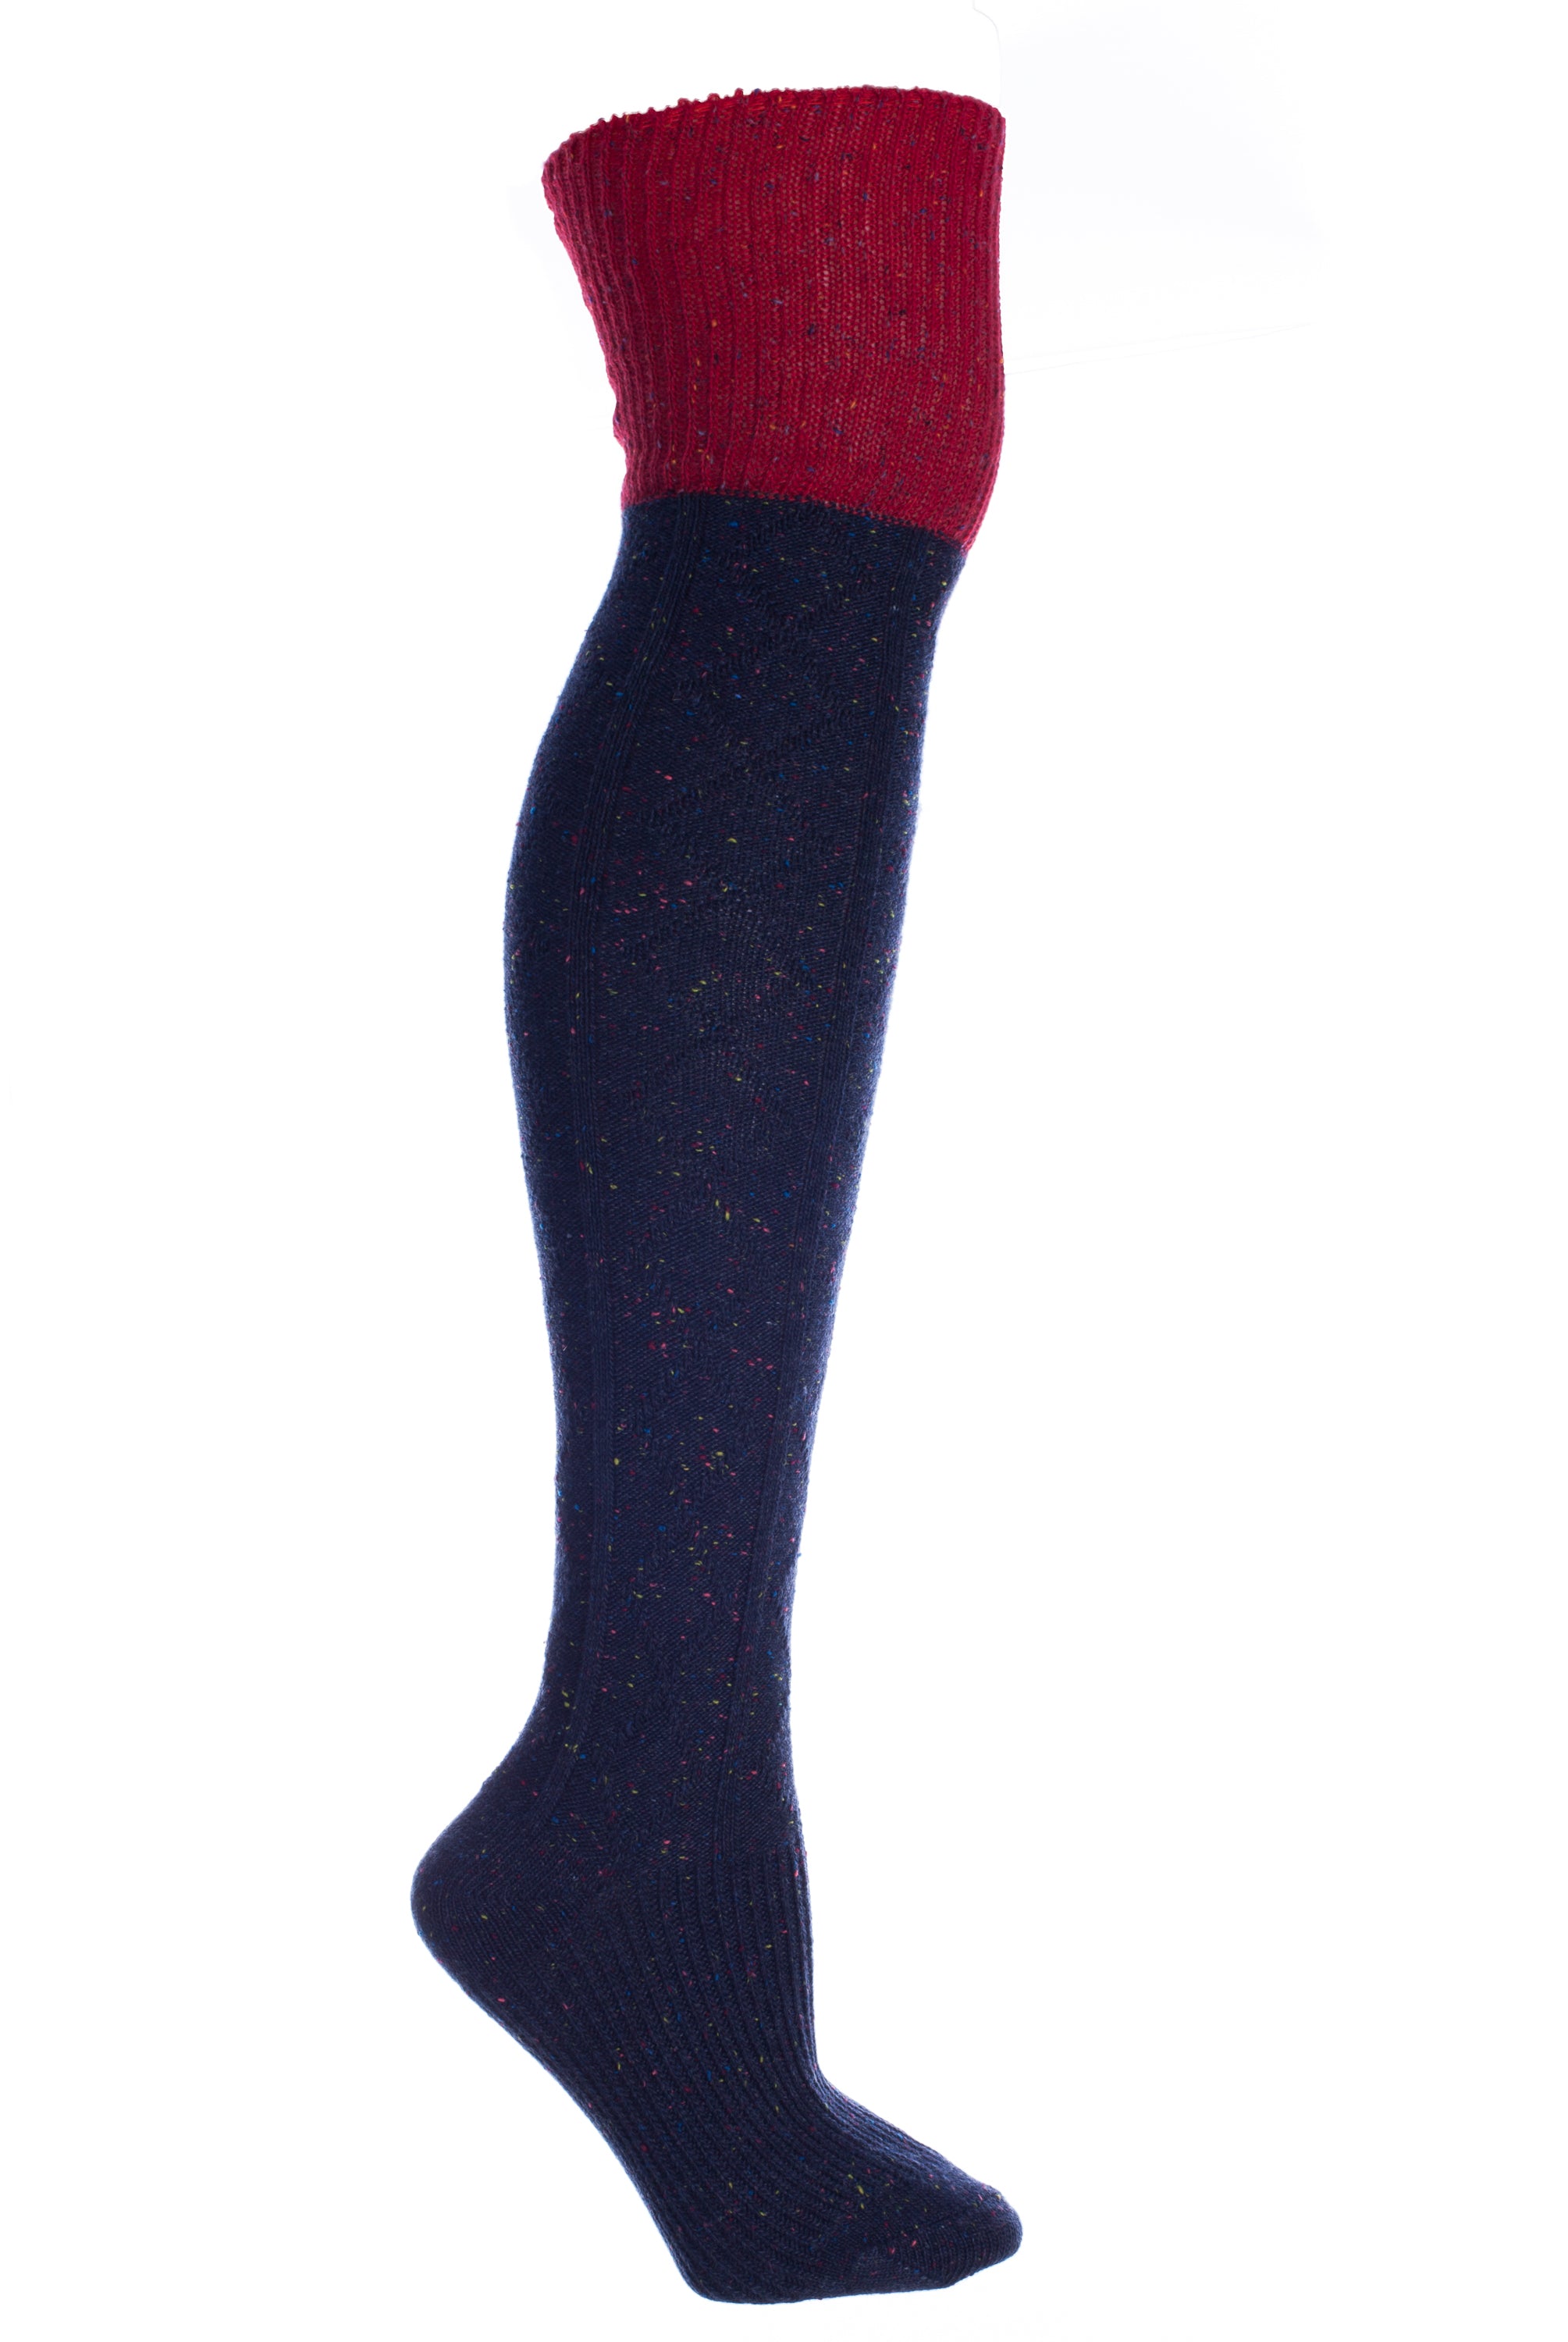 Navy Wool Speckled Knee High Boot Socks With Red Welt